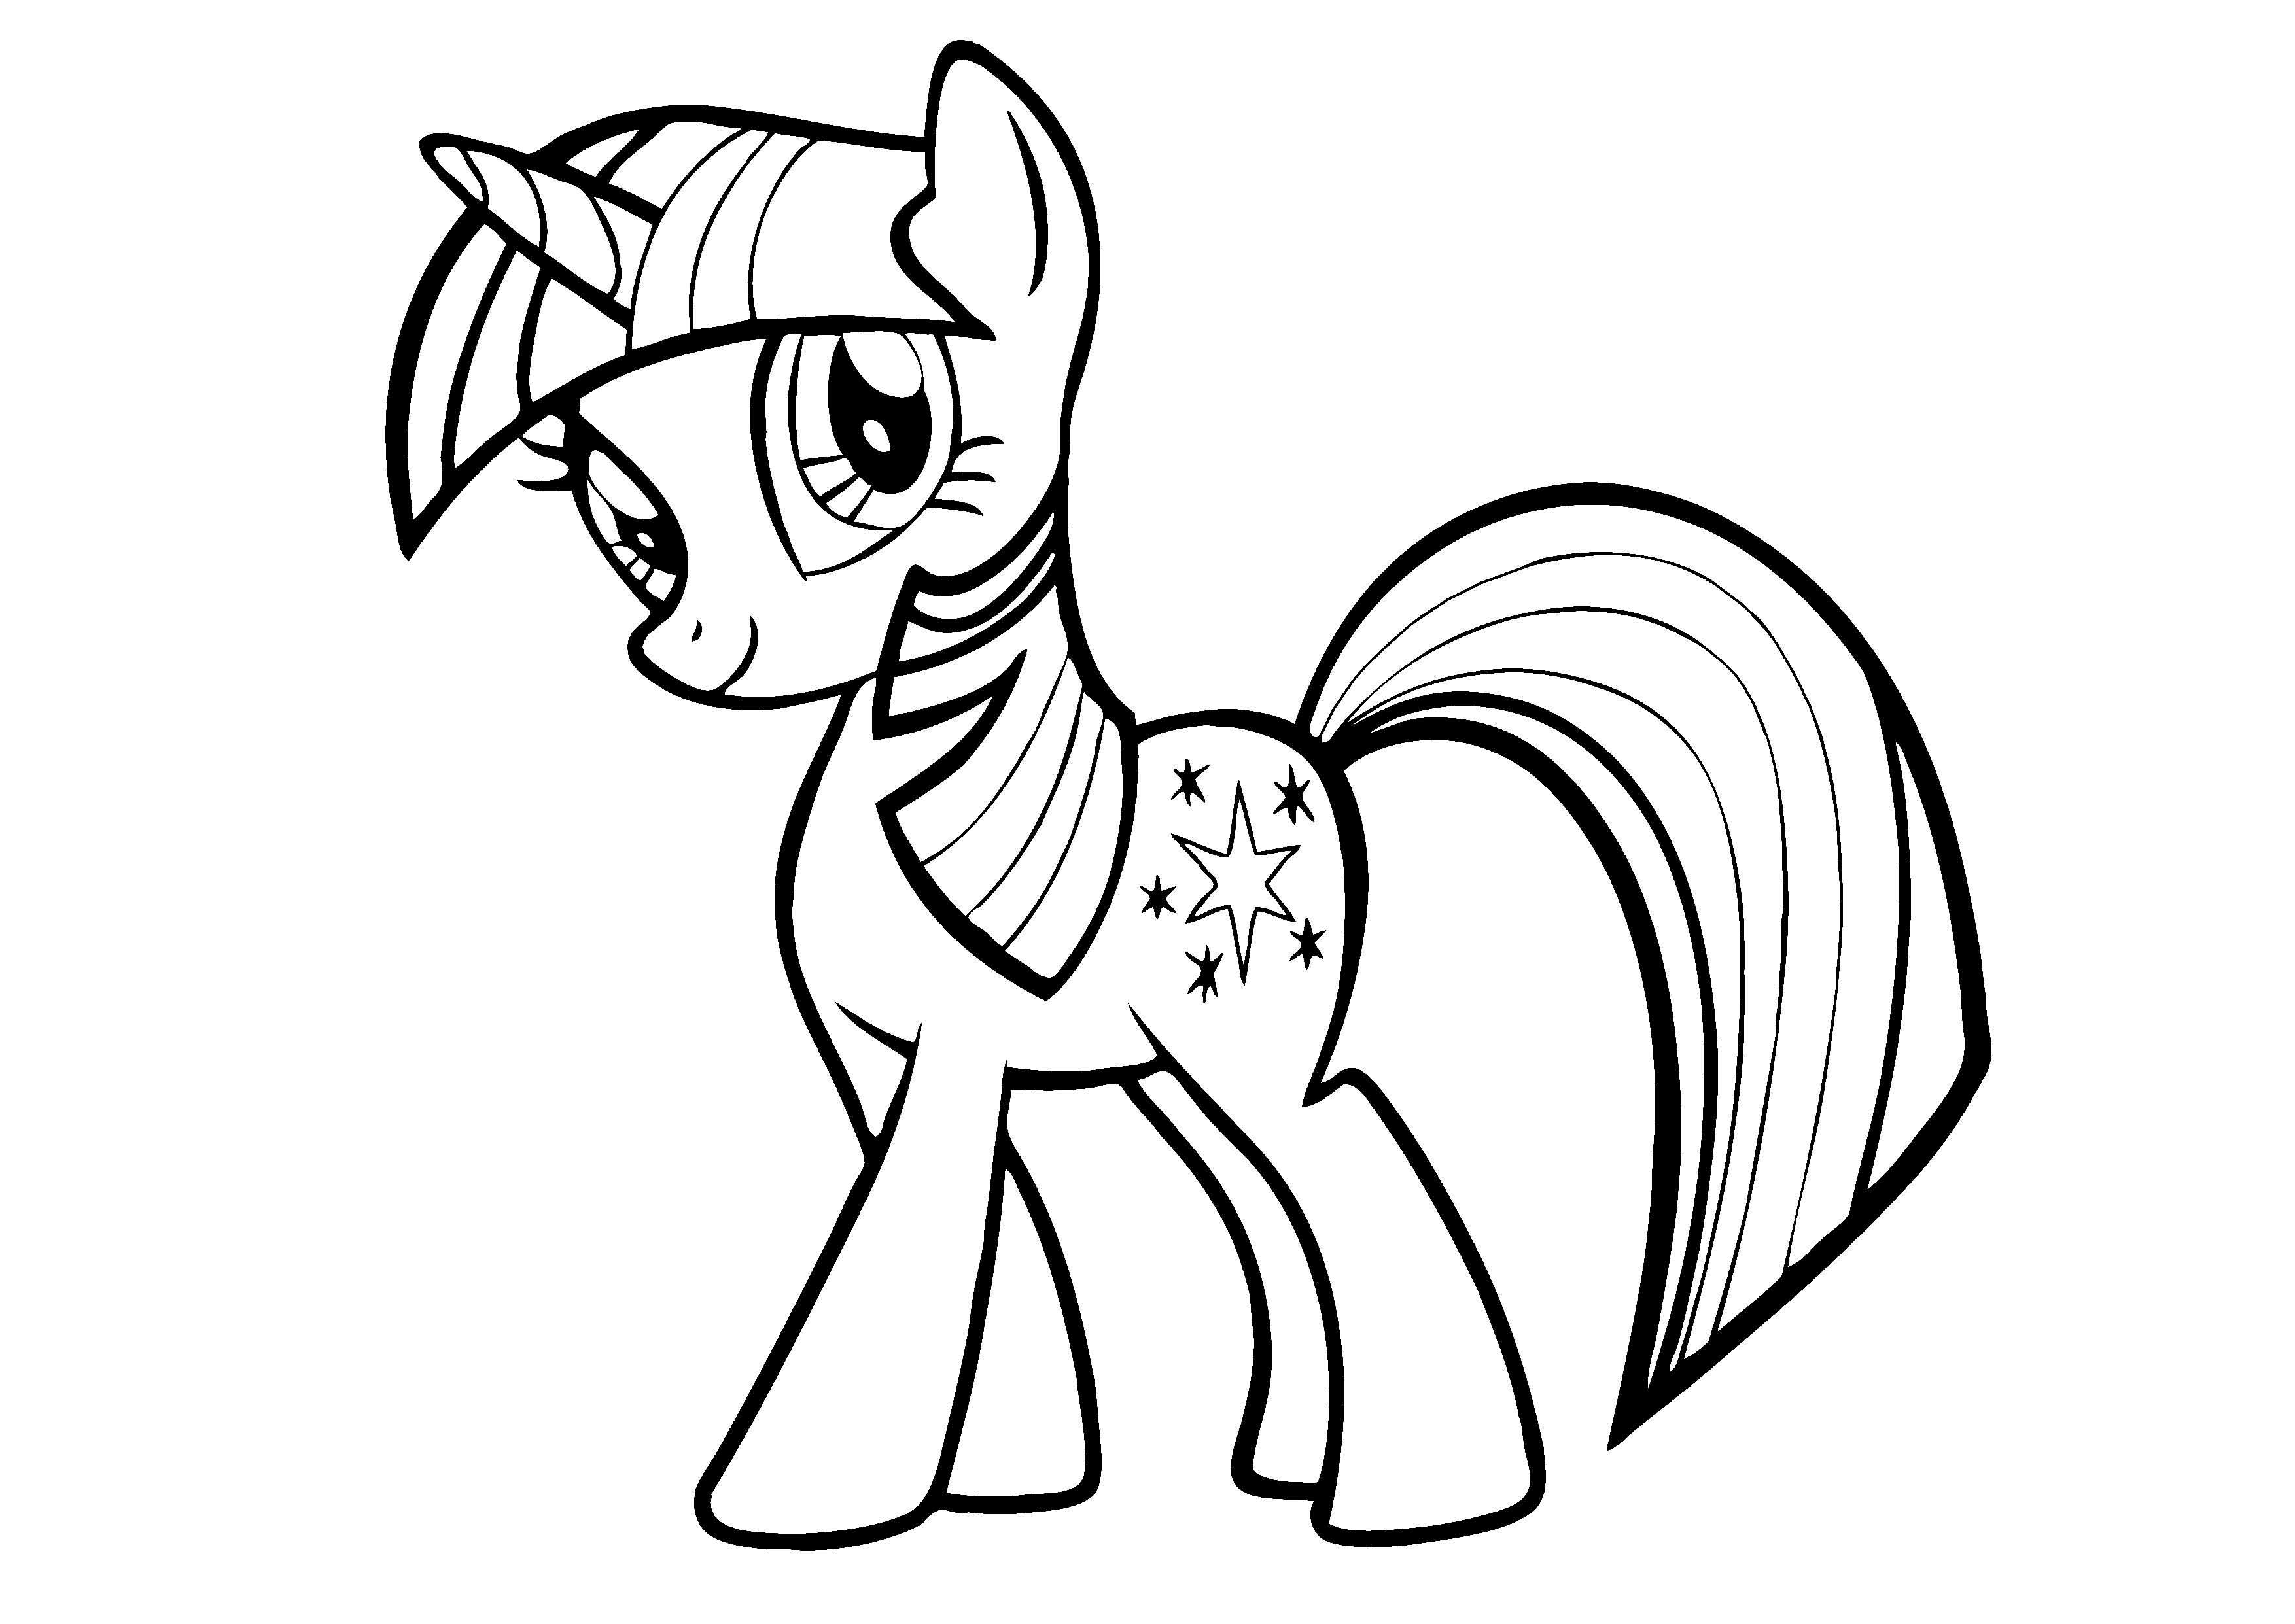 My Little Pony Colouring Sheets   Twilight Sparkle   My Little Pony ...